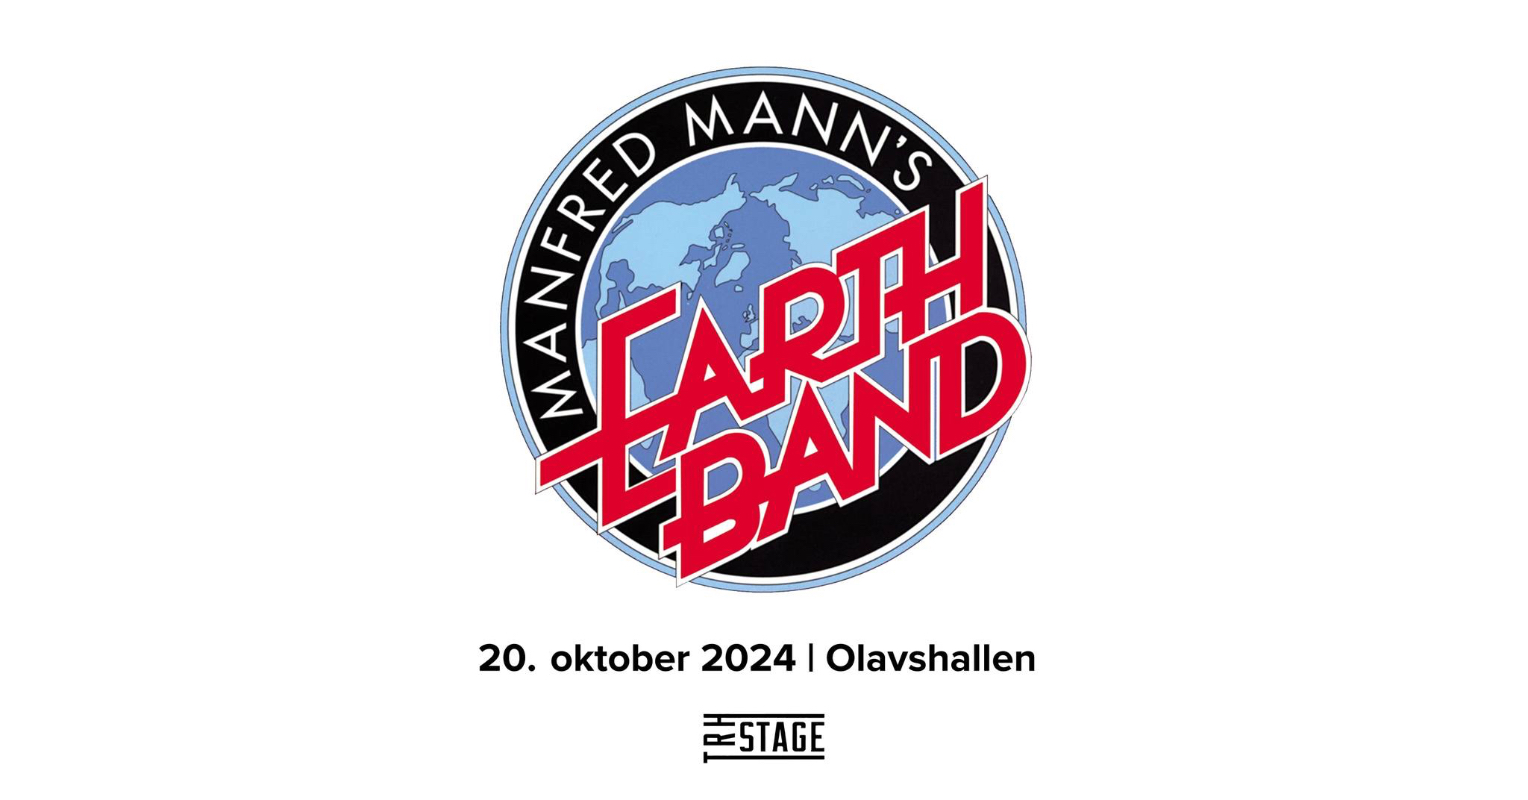 May be an image of clarinet, saxophone, trumpet and text that says 'NFRED ARTH EGAND MANN'S MA 20. oktober 2024 Olavshallen STAGE'